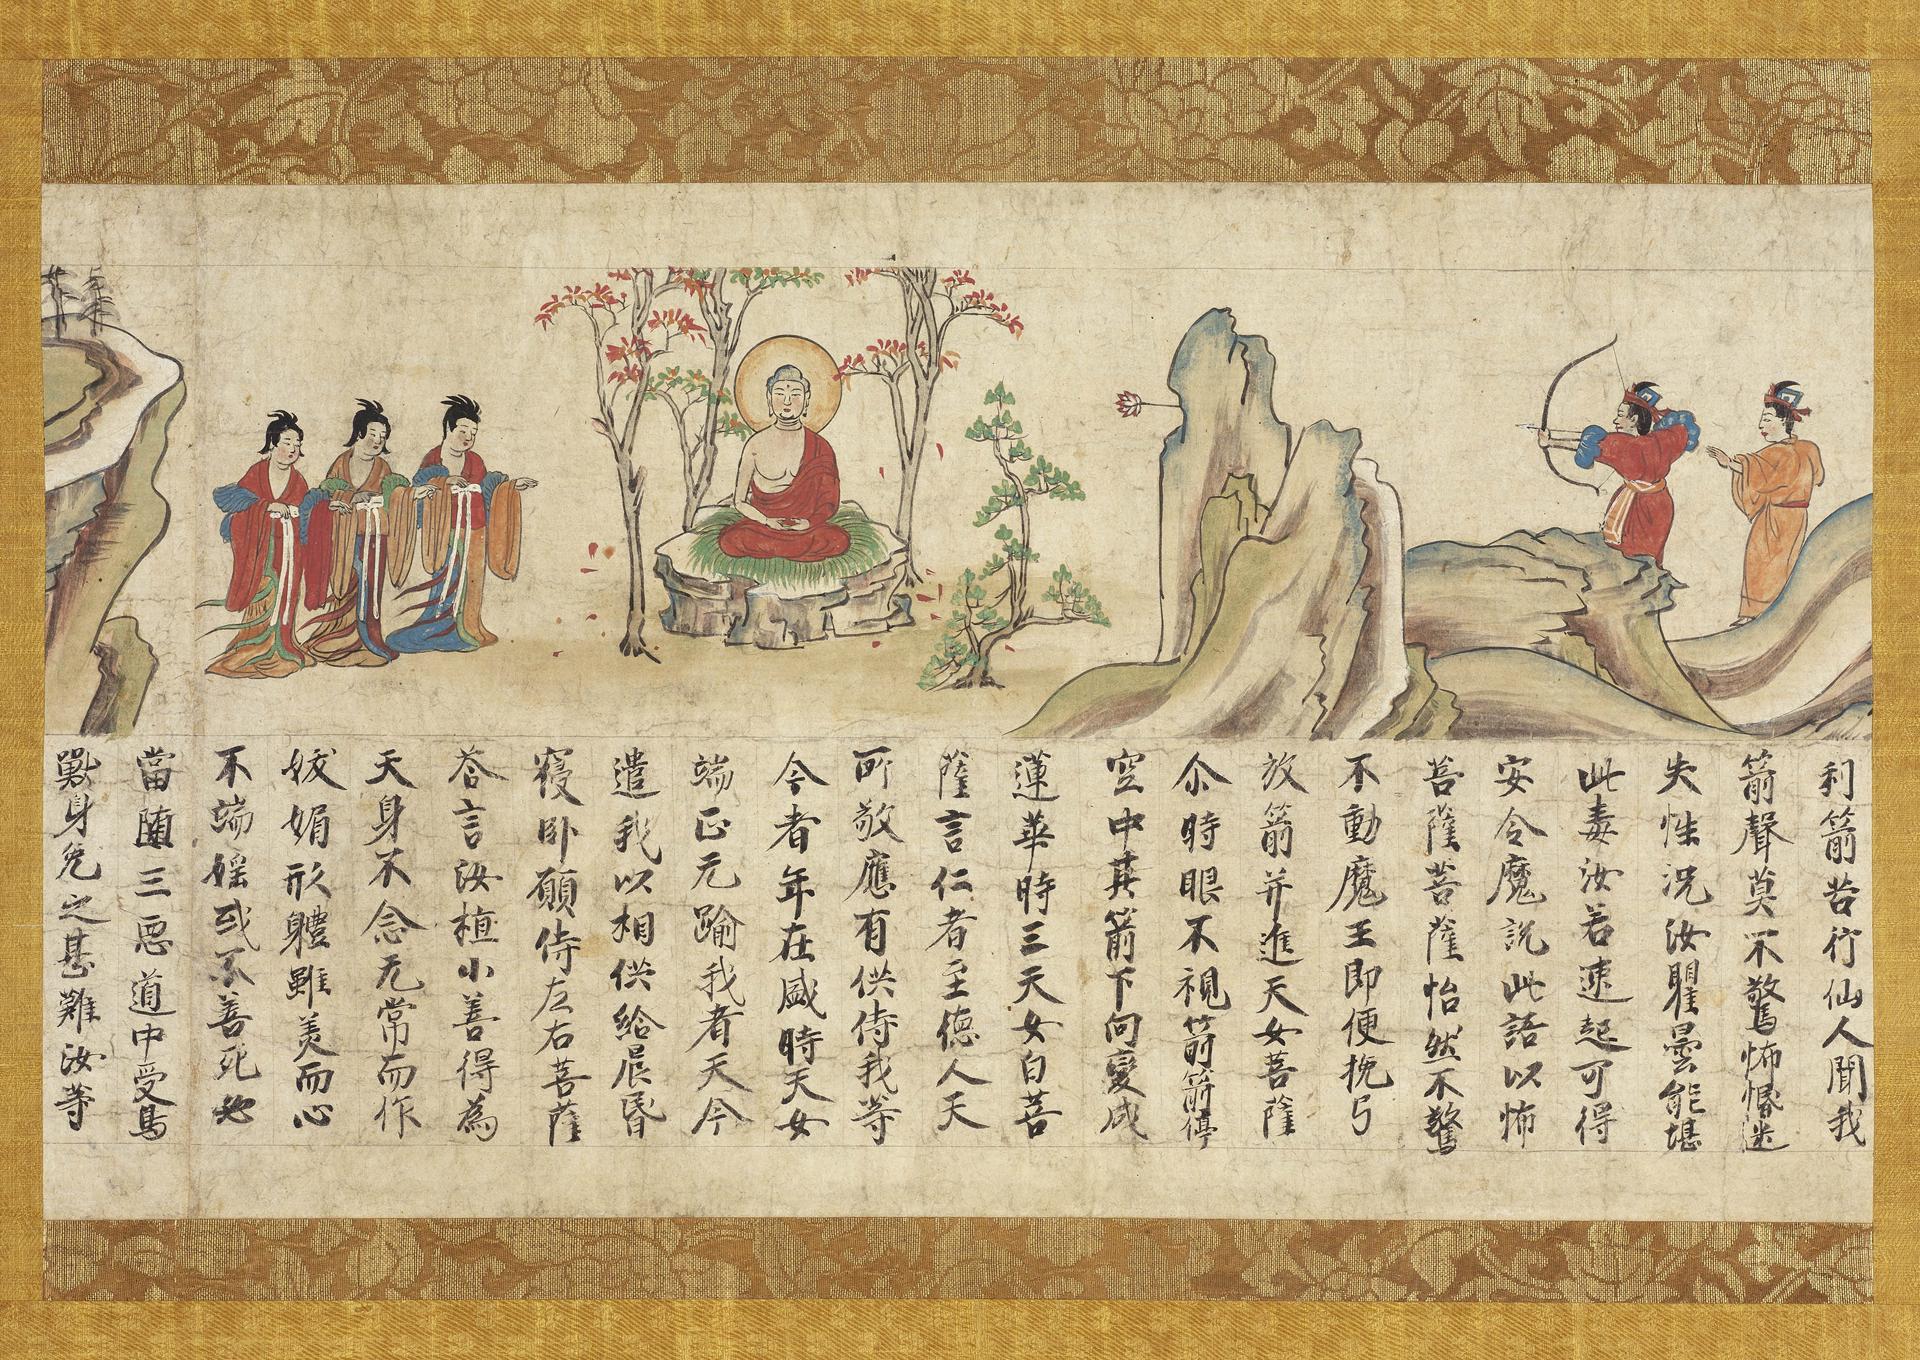 A hanging scroll dating from the 13th century is one of the gifts destined for the MFA.Photo: courtesy Boston Globe